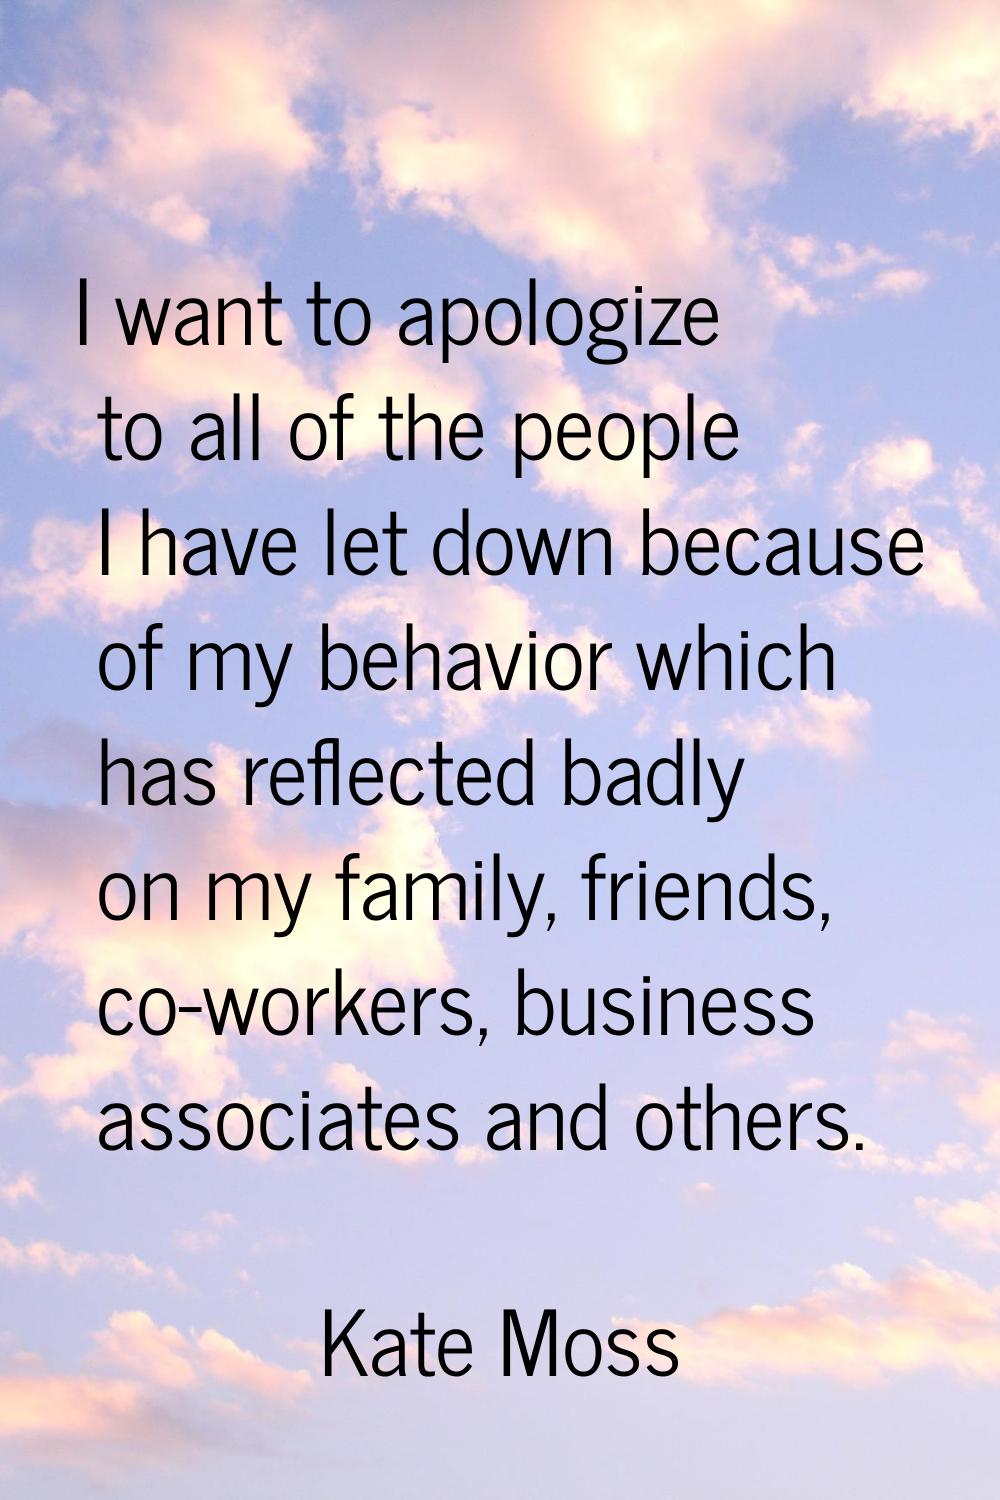 I want to apologize to all of the people I have let down because of my behavior which has reflected